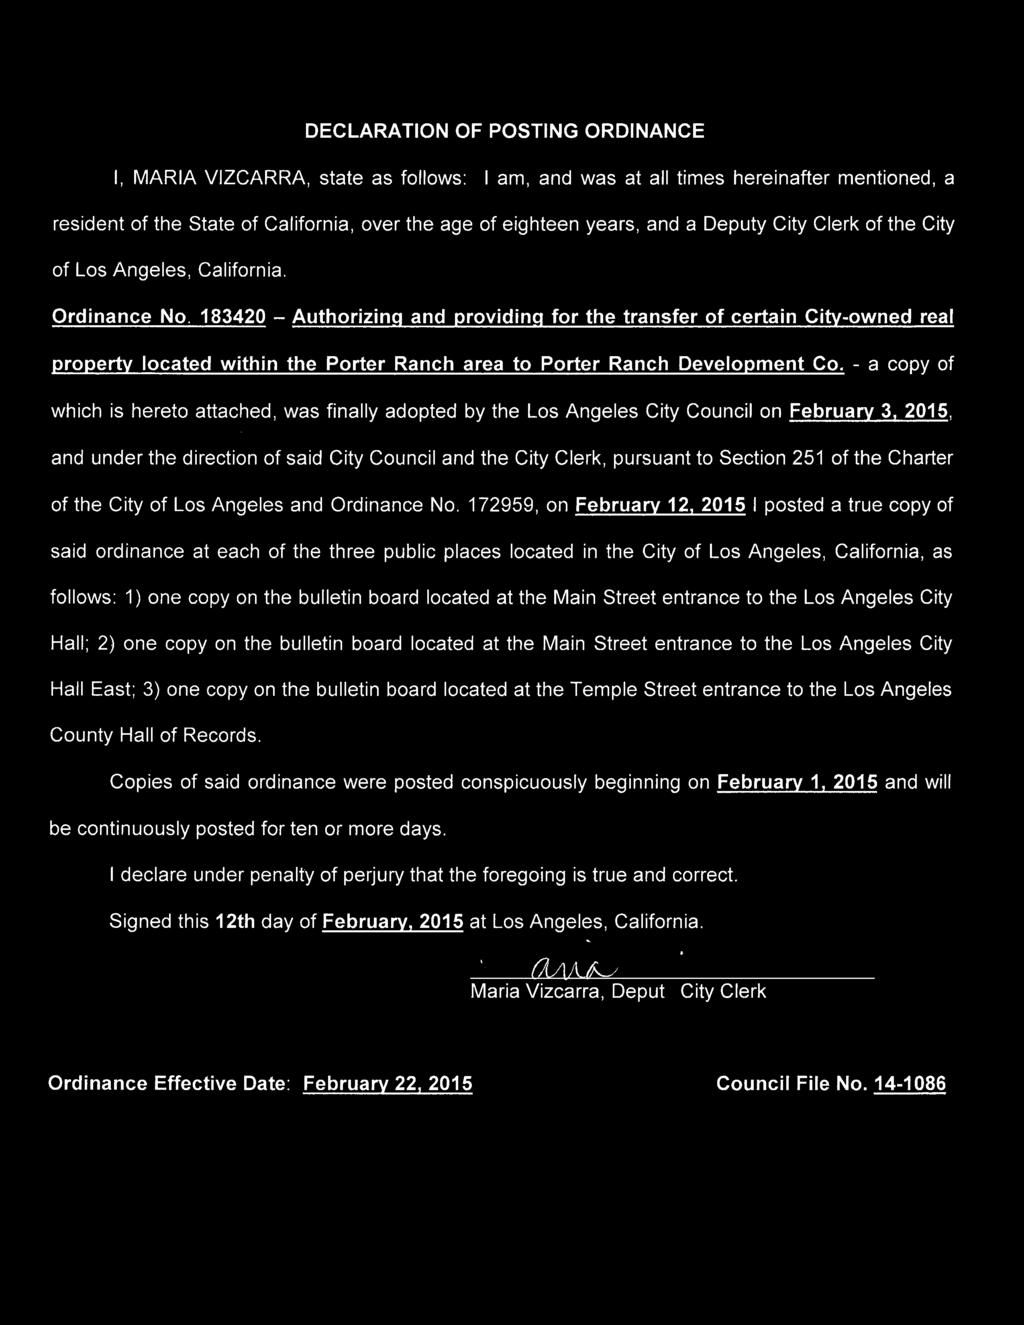 183420 Authorizing and providing for the transfer of certain City-owned real property located within the Porter Ranch area to Porter Ranch Development Co.